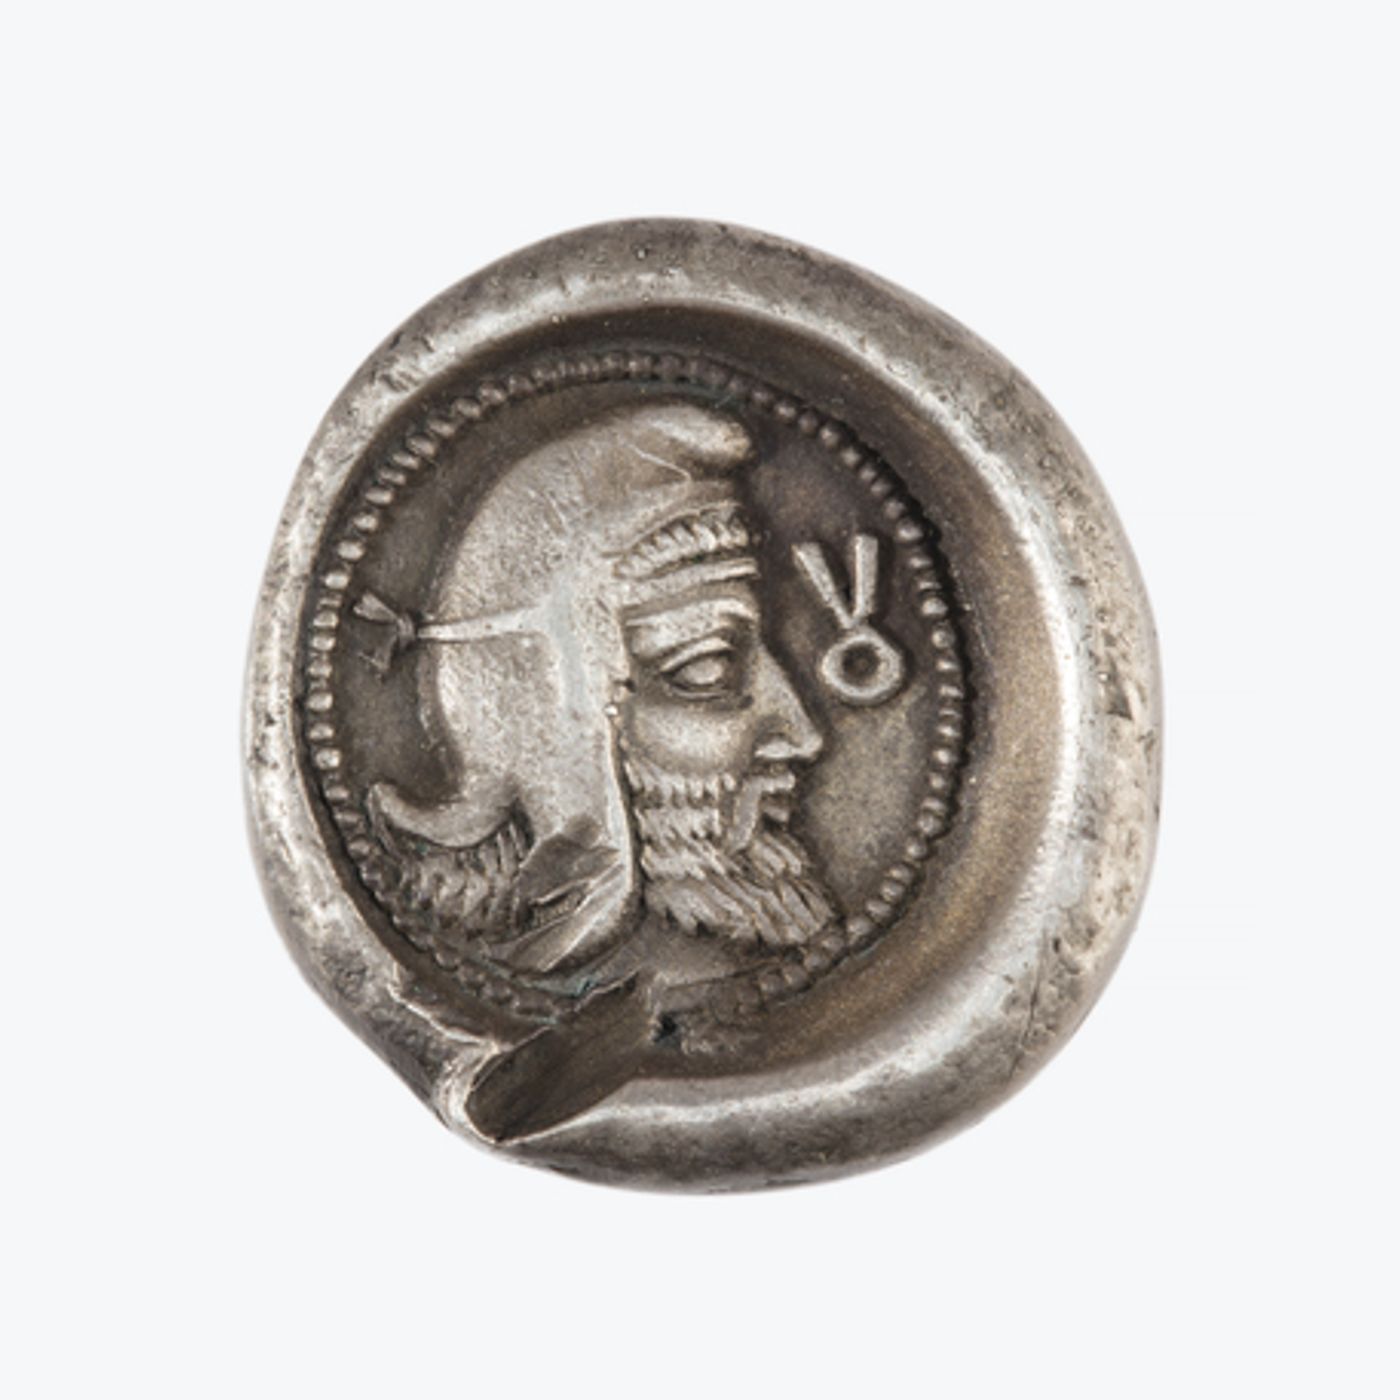 38: An Electrotype of an ancient Lydian coin